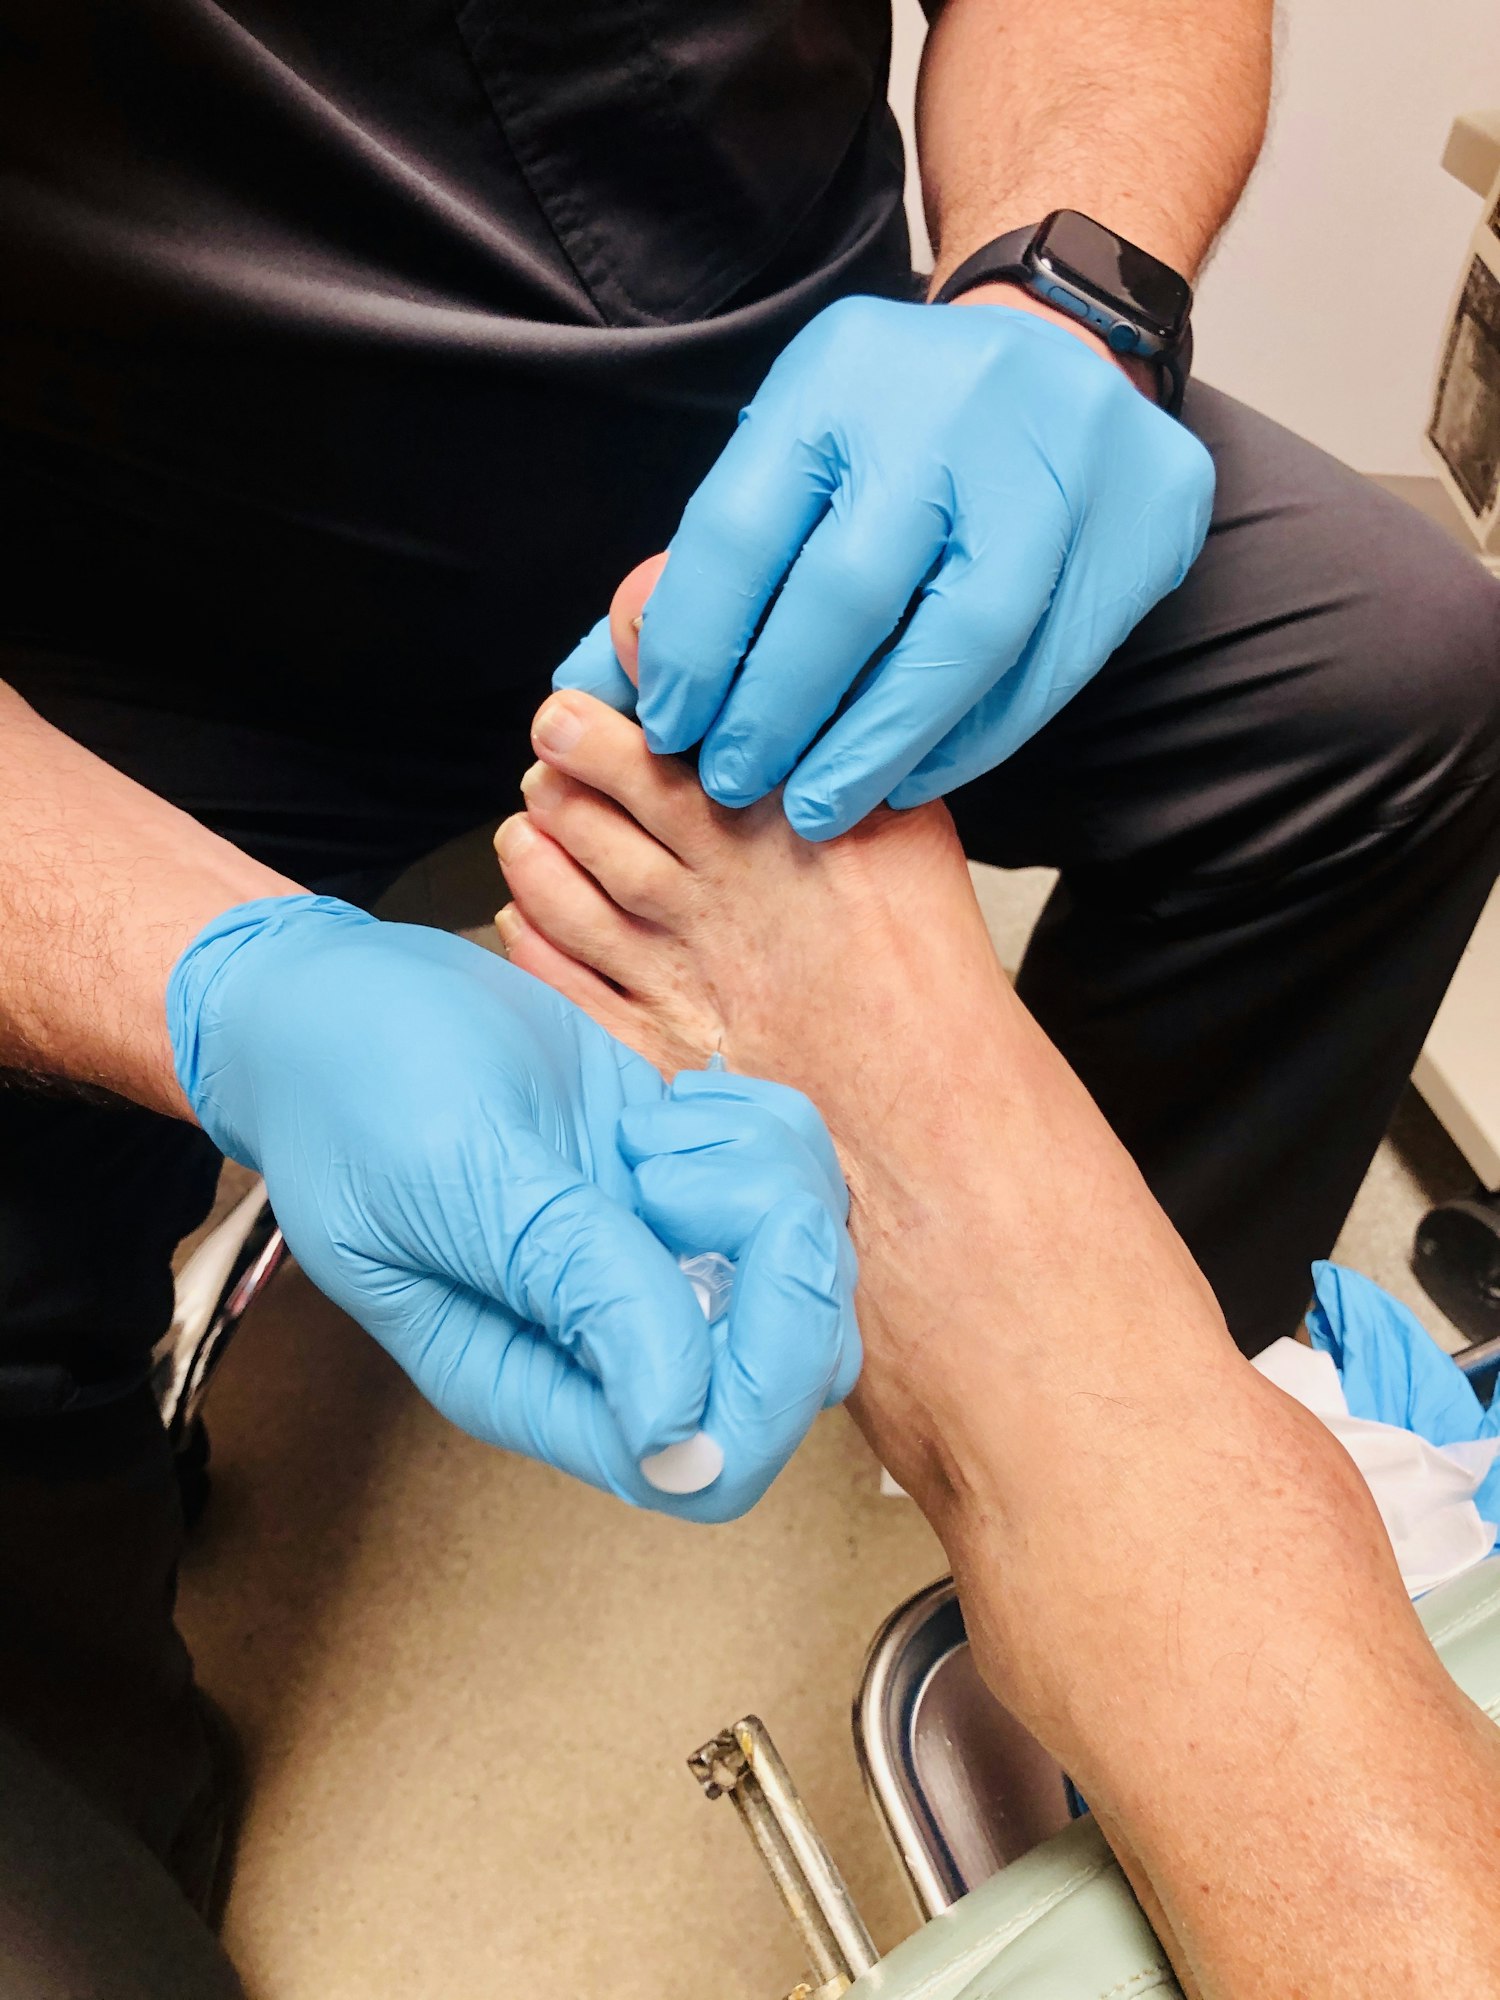 Podiatrist giving a steroid injection into the patient’s foot.